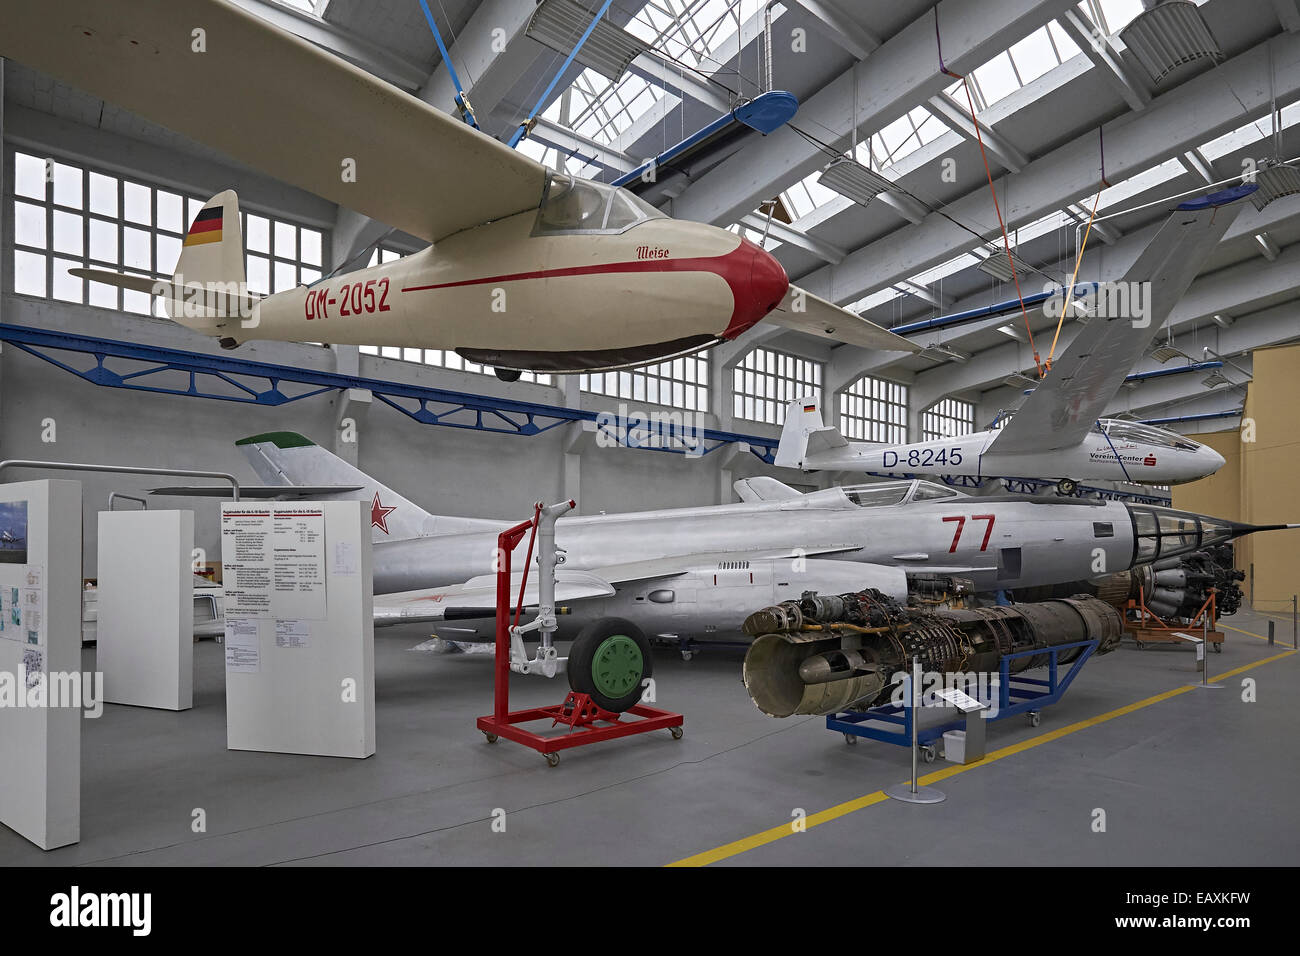 Hugo Junkers Technical Museum in Dessau, Germany Stock Photo